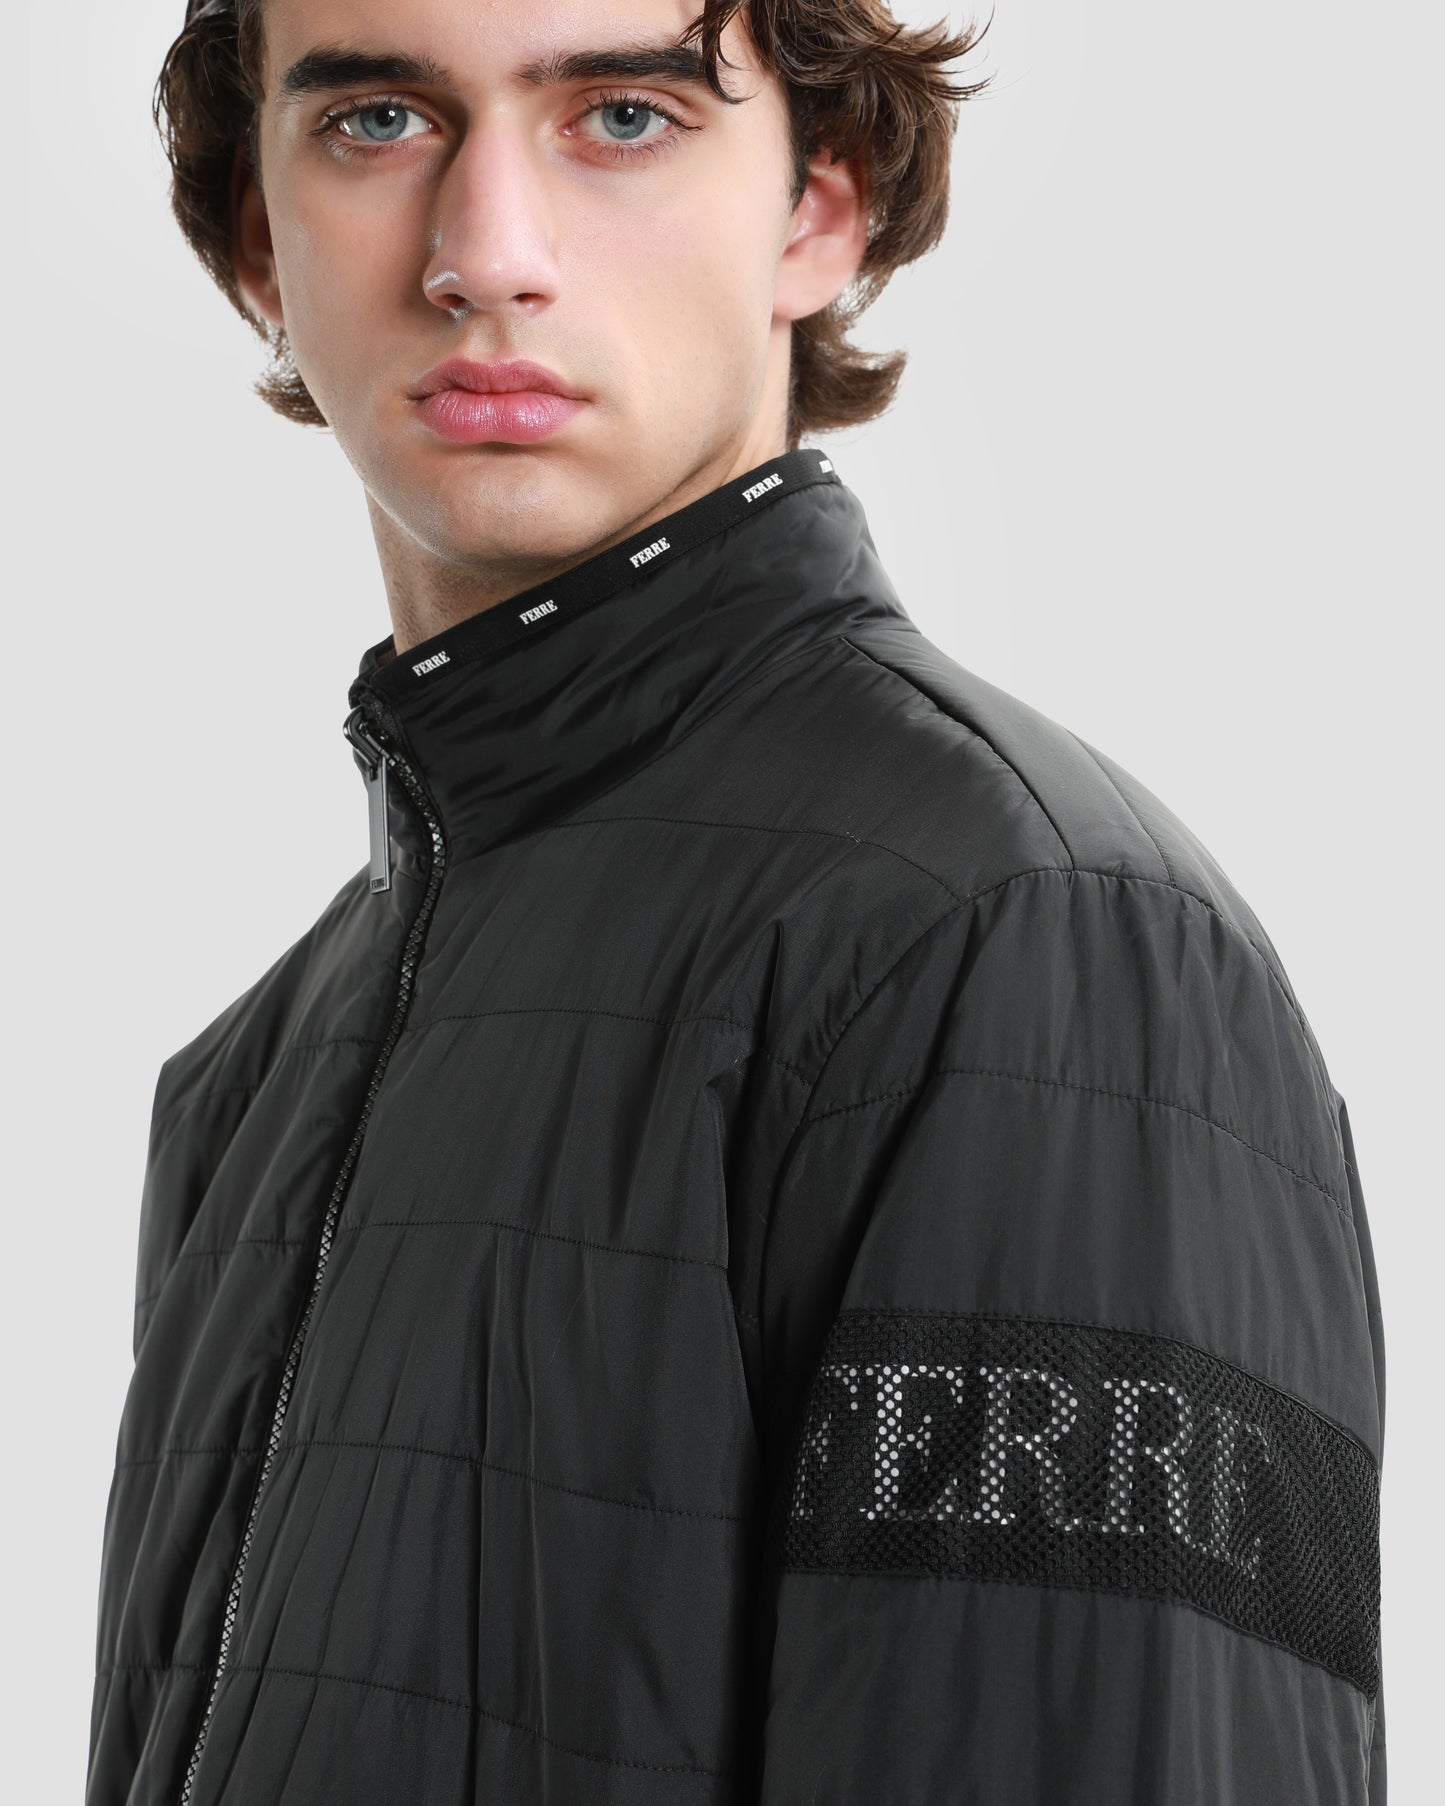 Quilted Reversible Puffer Jacket